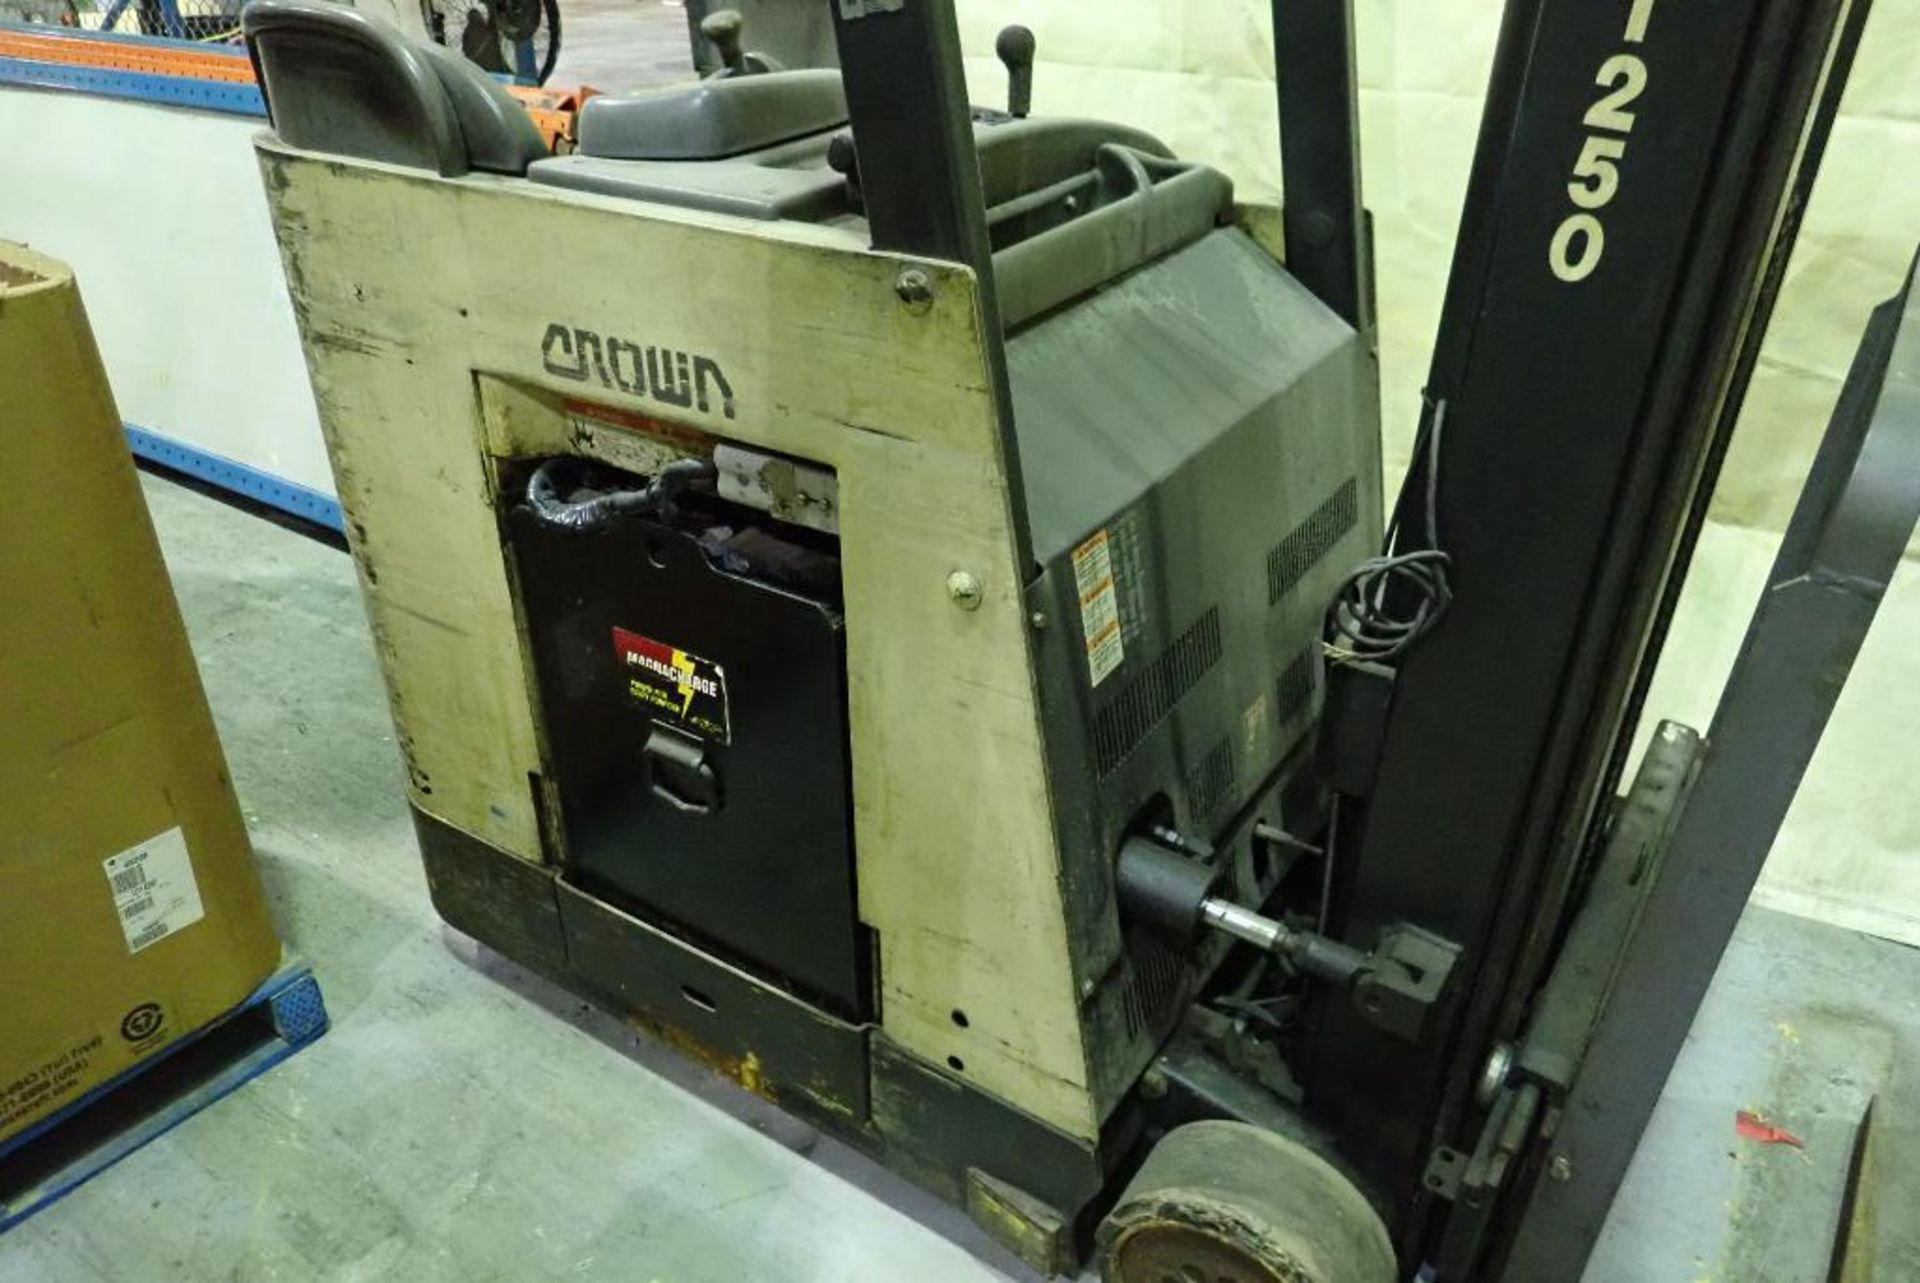 Crown R3000 electric stand up forklift, SN 1A234253, 3700 lb. capacity, 154 in. lift height, side sh - Image 9 of 11